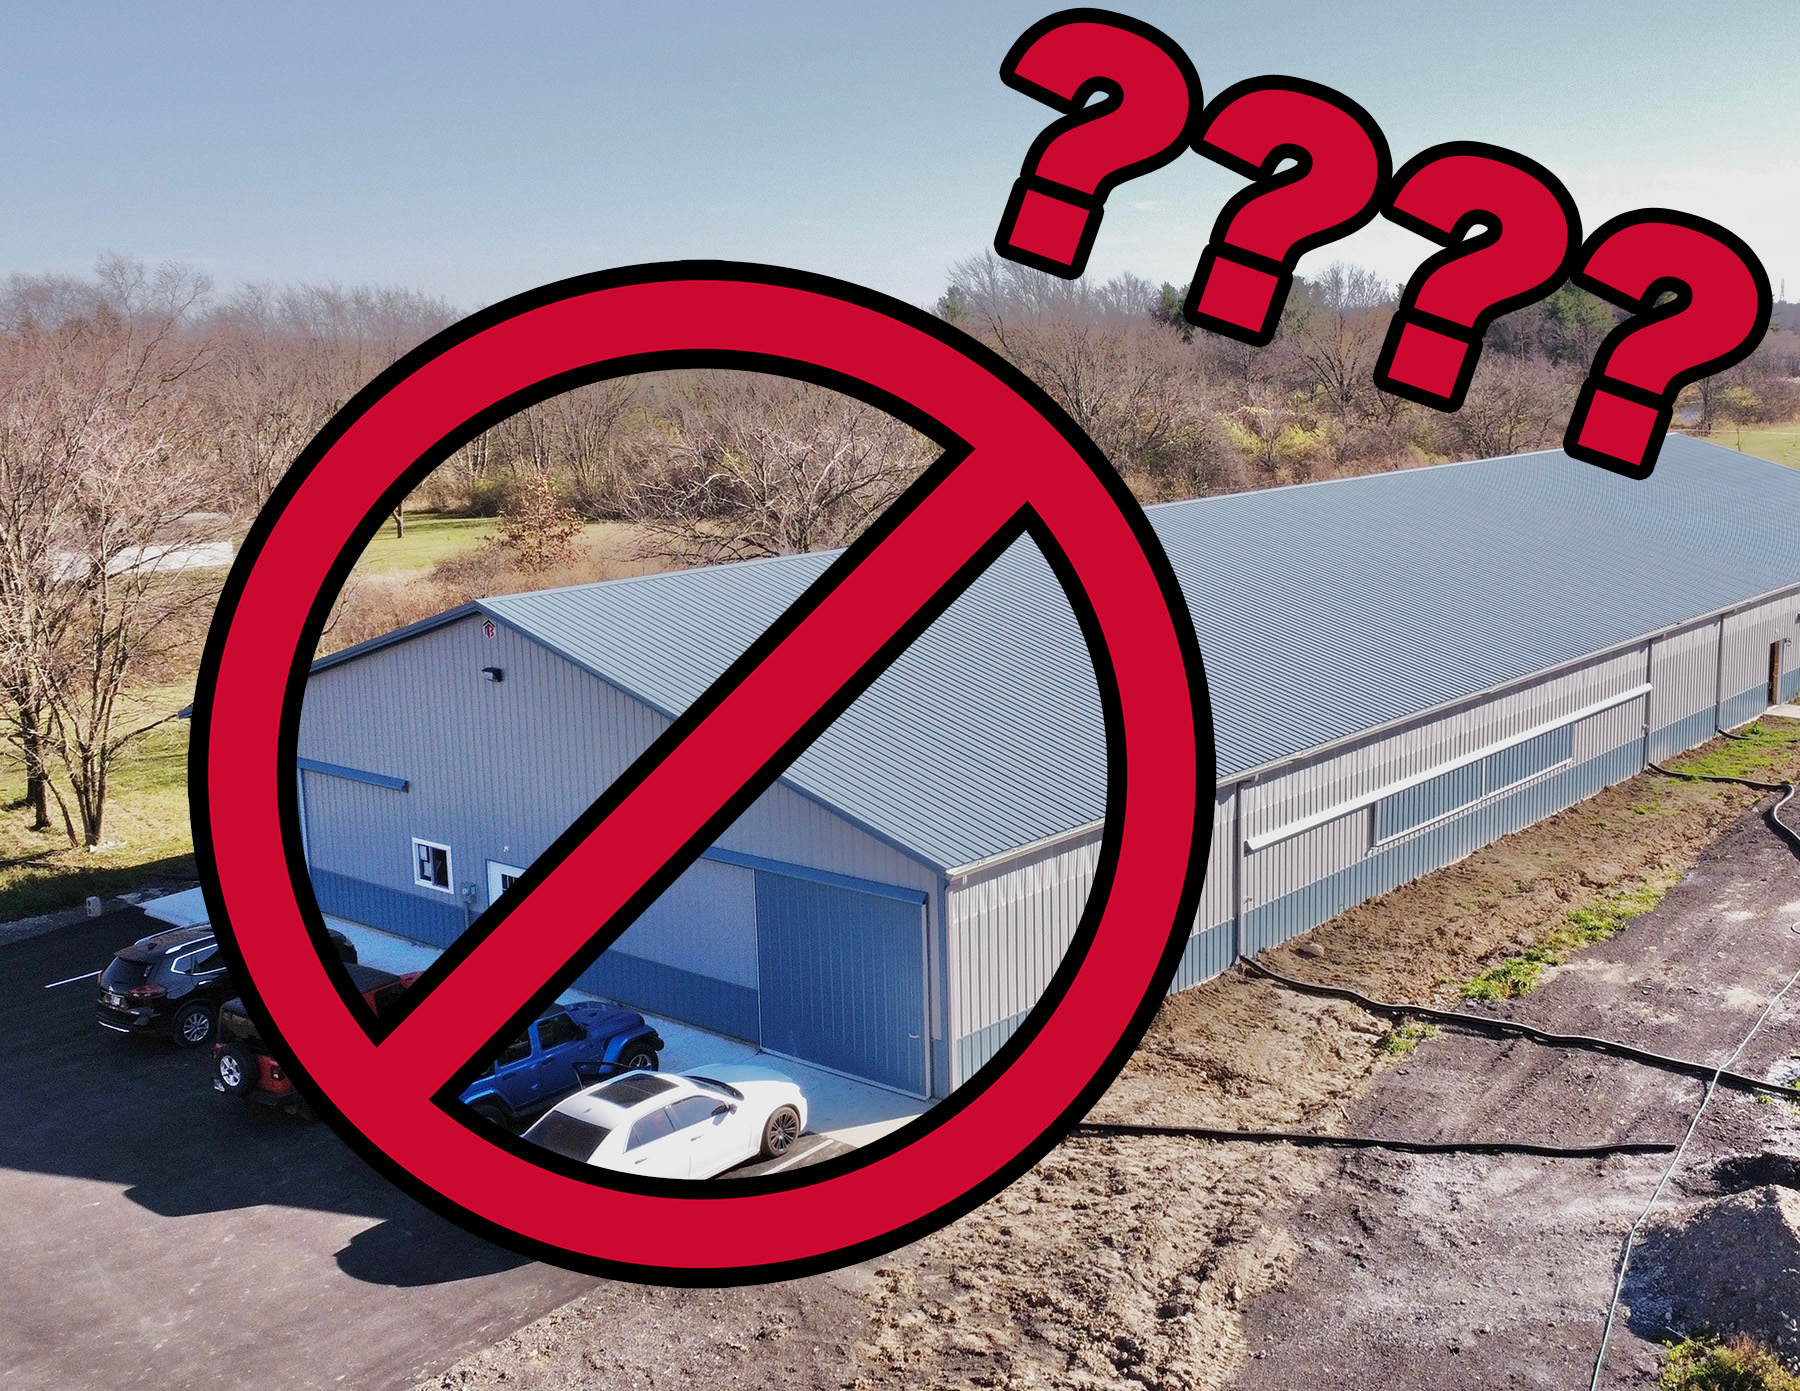 5 reasons you may NOT want to build a pole barn - Image